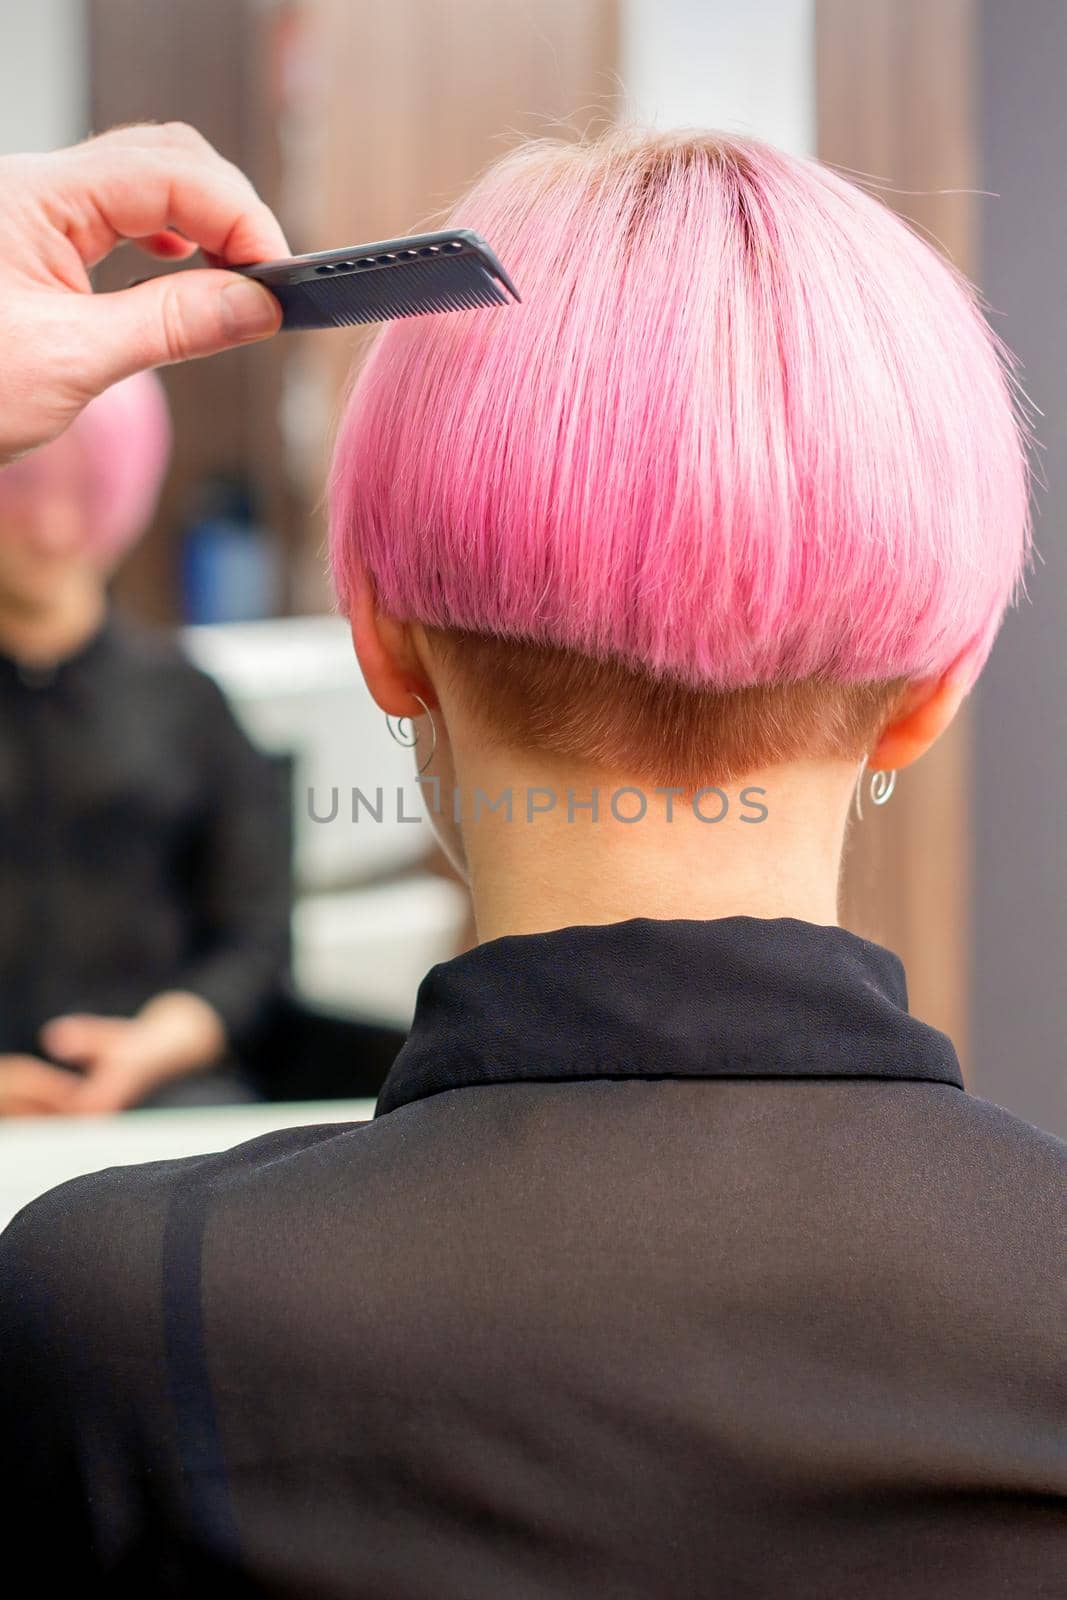 A hairdresser is combing the dyed pink short hair of the female client in hairdresser salon, back view